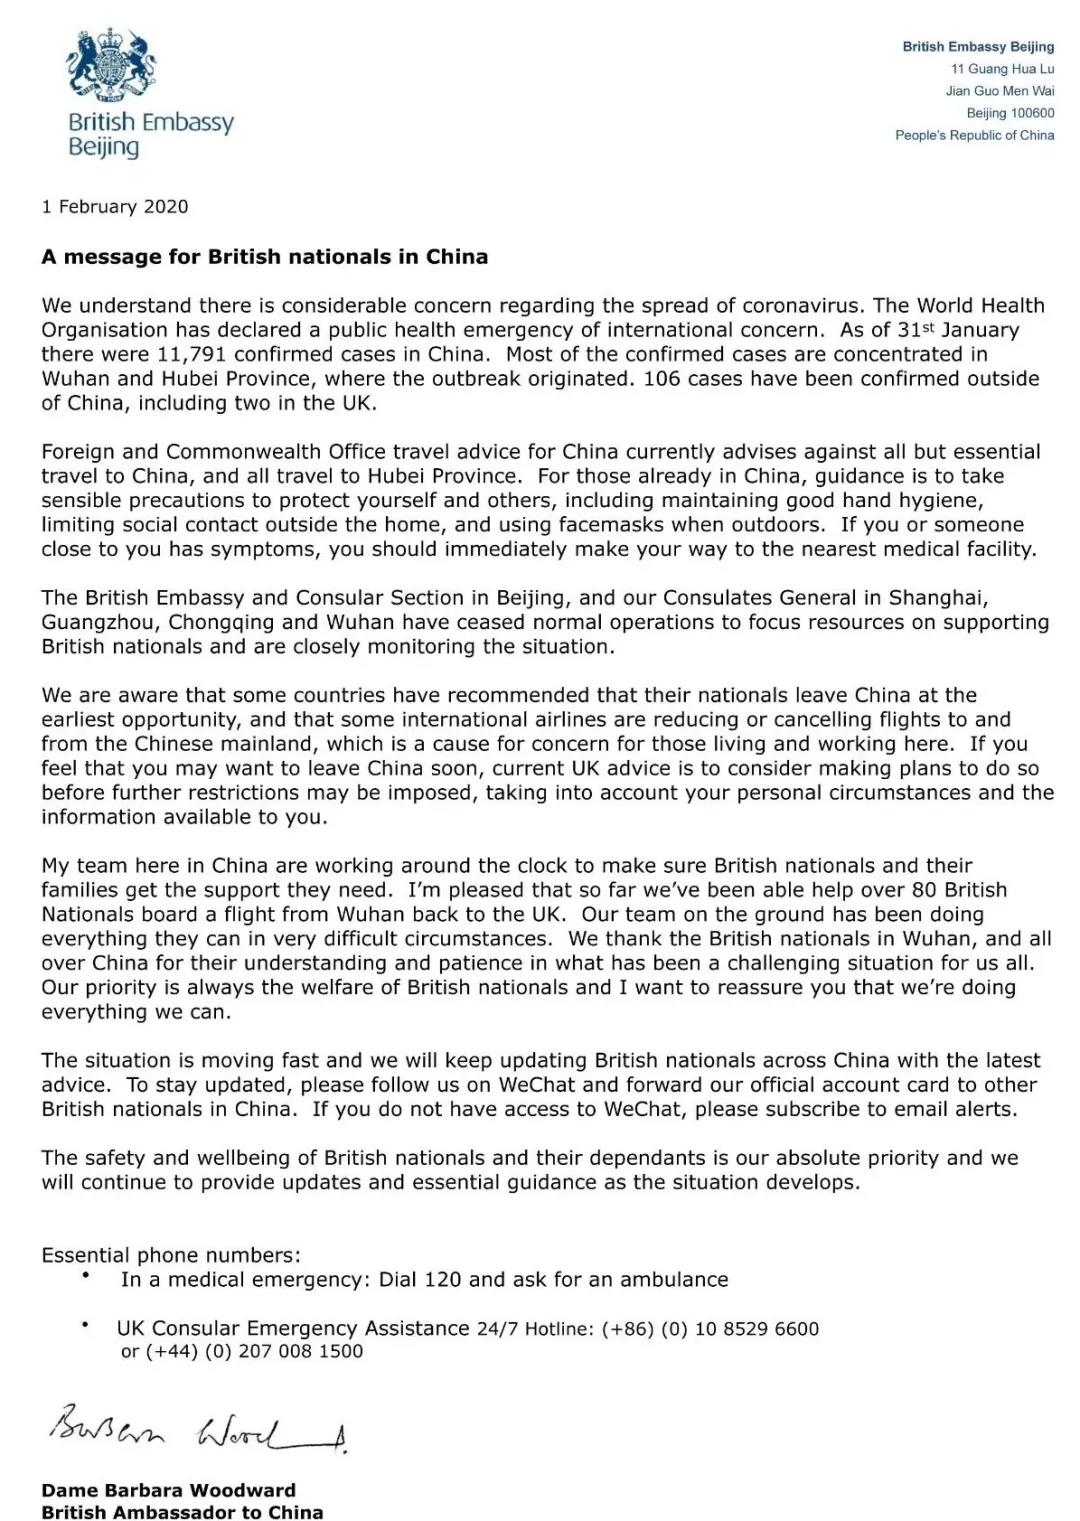 Ambassador's message to UK nationals in Wuhan and Hubei